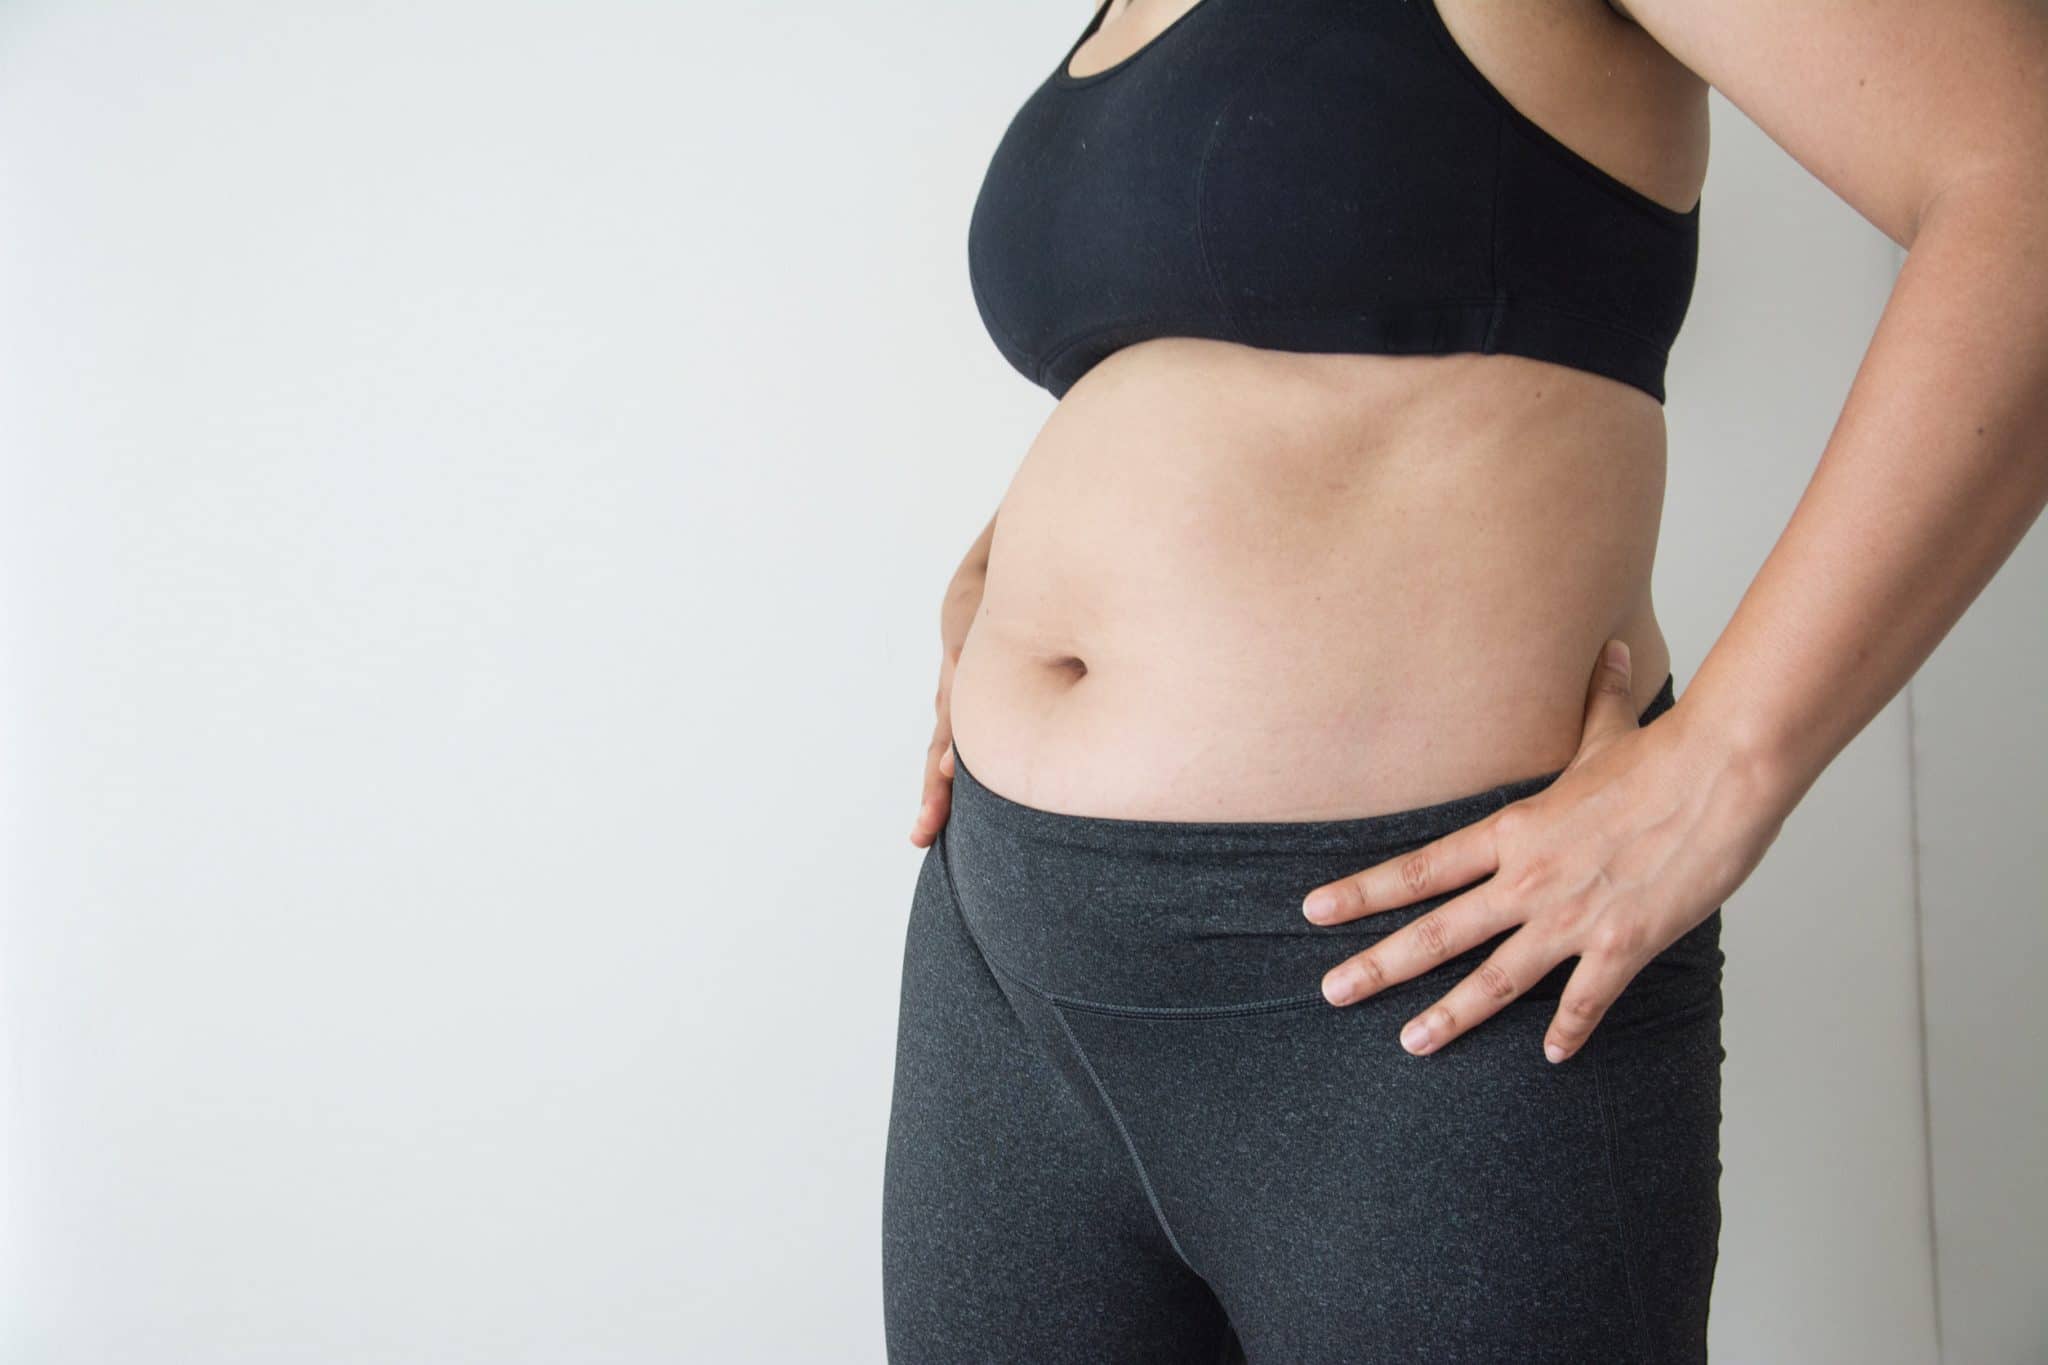 How To Make Your Stomach Look Flat in Clothes